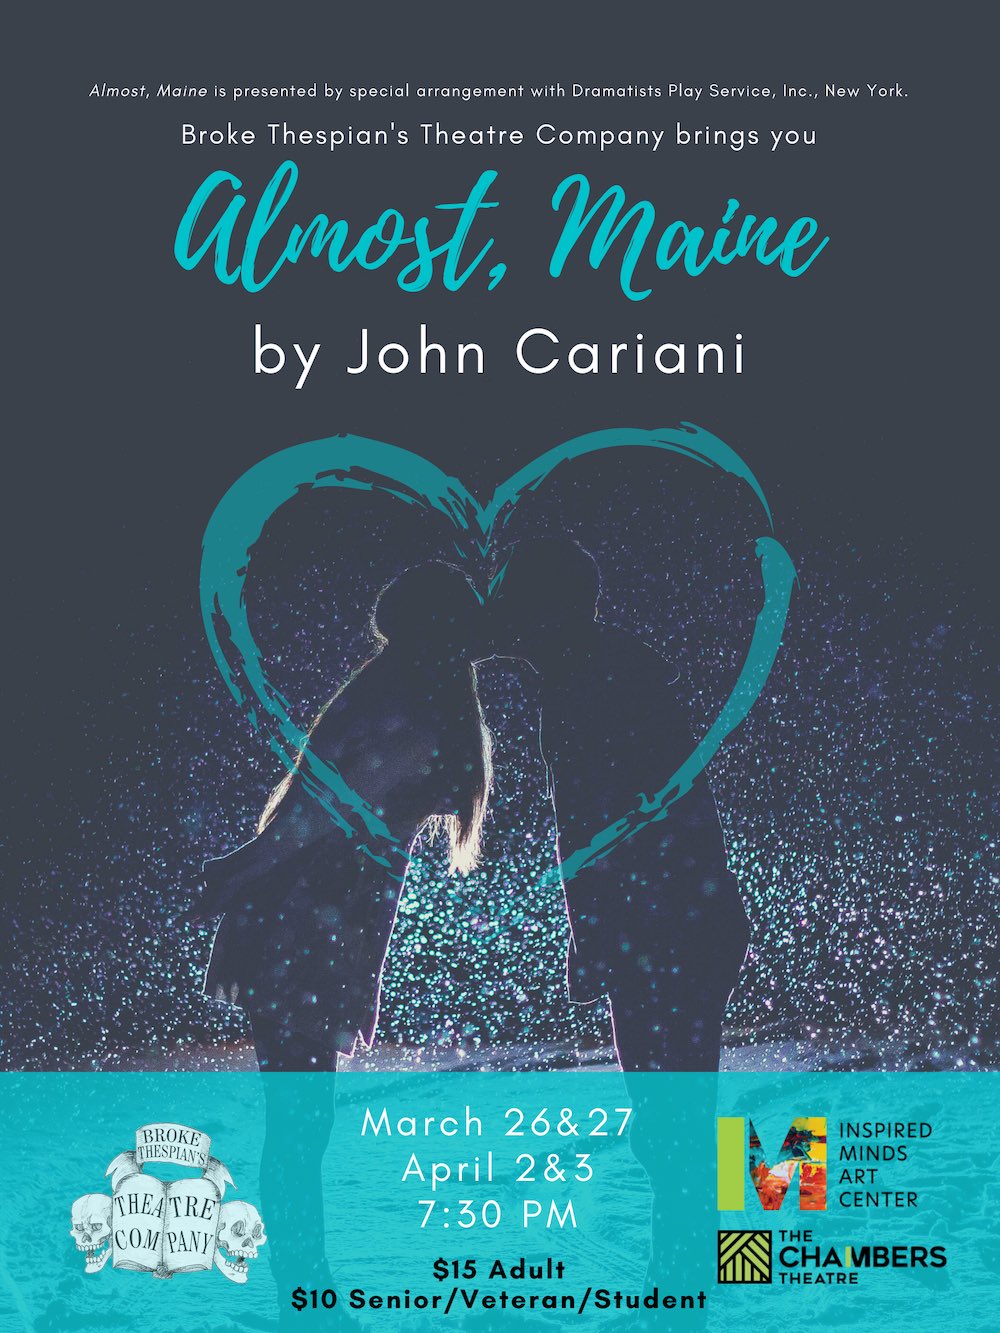 Almost, Maine by Broke Thespian's Theatre Company